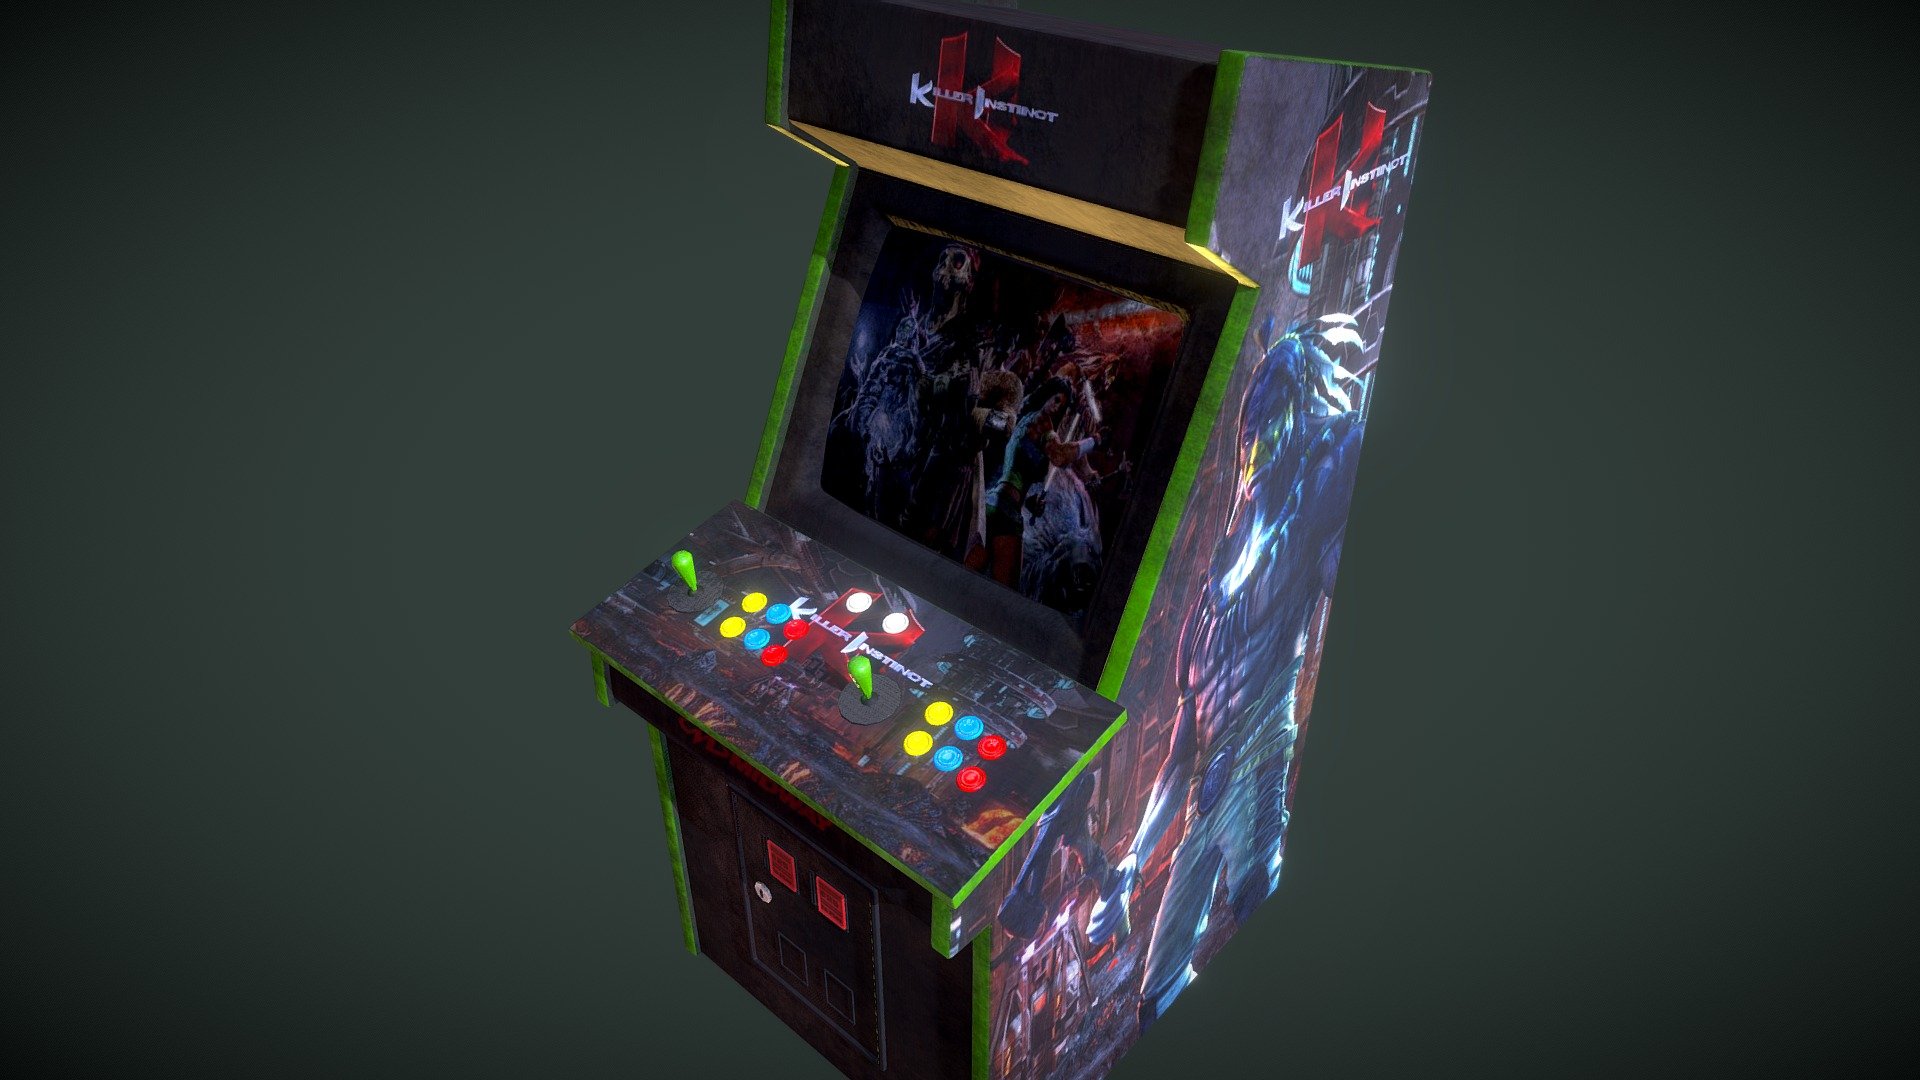 When I was young, I used to play this game almost every day. It truly brought back some really great memories creating this guy. I used the same framework as the Mortal Kombat Arcade but I wanted to make this one its own. Hope you all enjoy it! - Arcade Killer Instinct Fan Art - Buy Royalty Free 3D model by DanielGilbreath 3d model